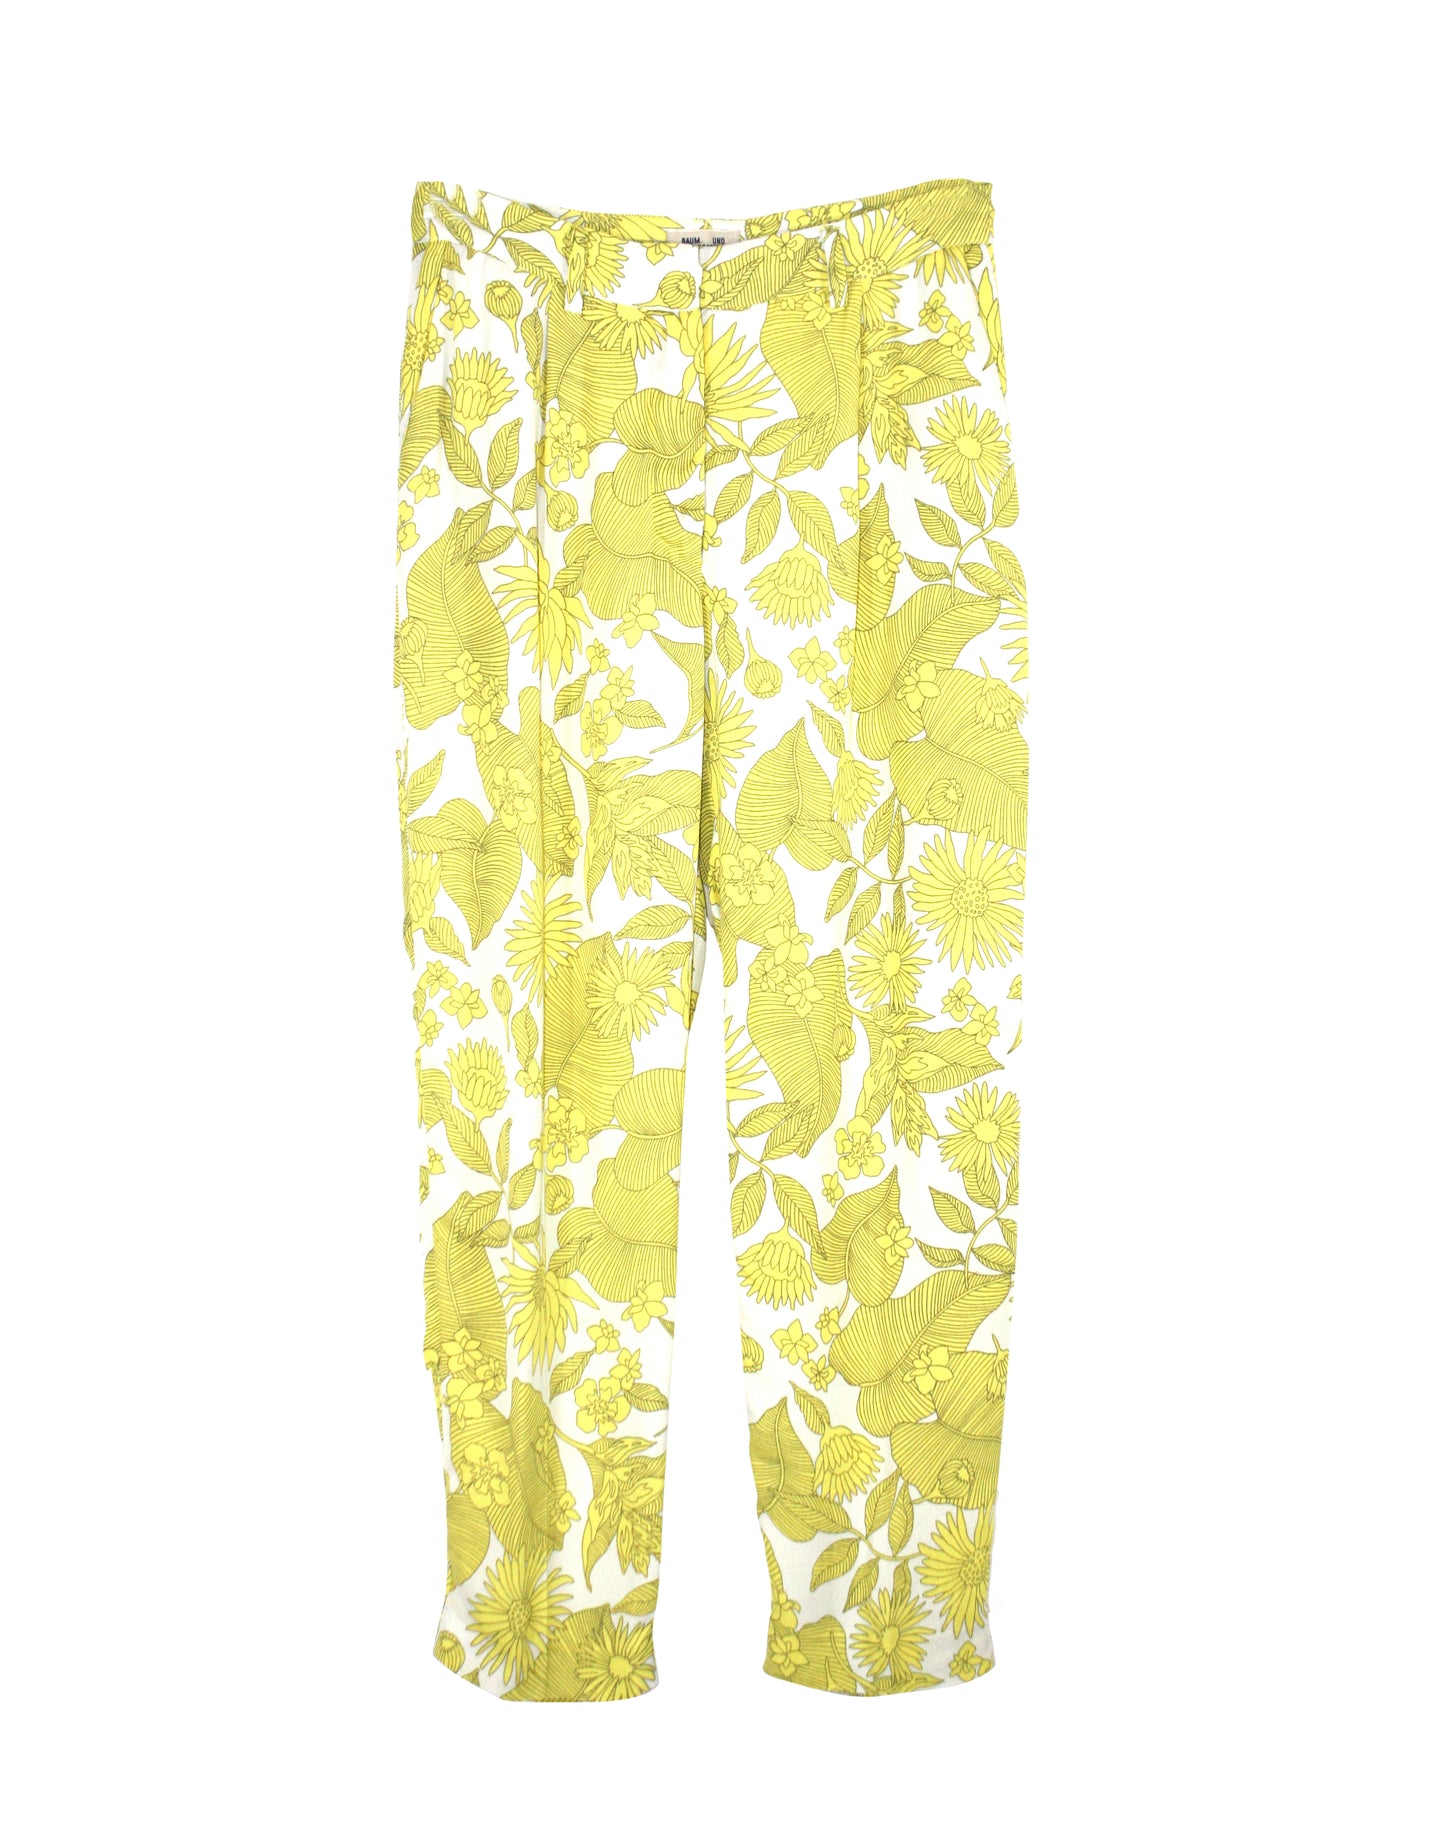 Kucho Yellow Floral Trousers - pre-loved